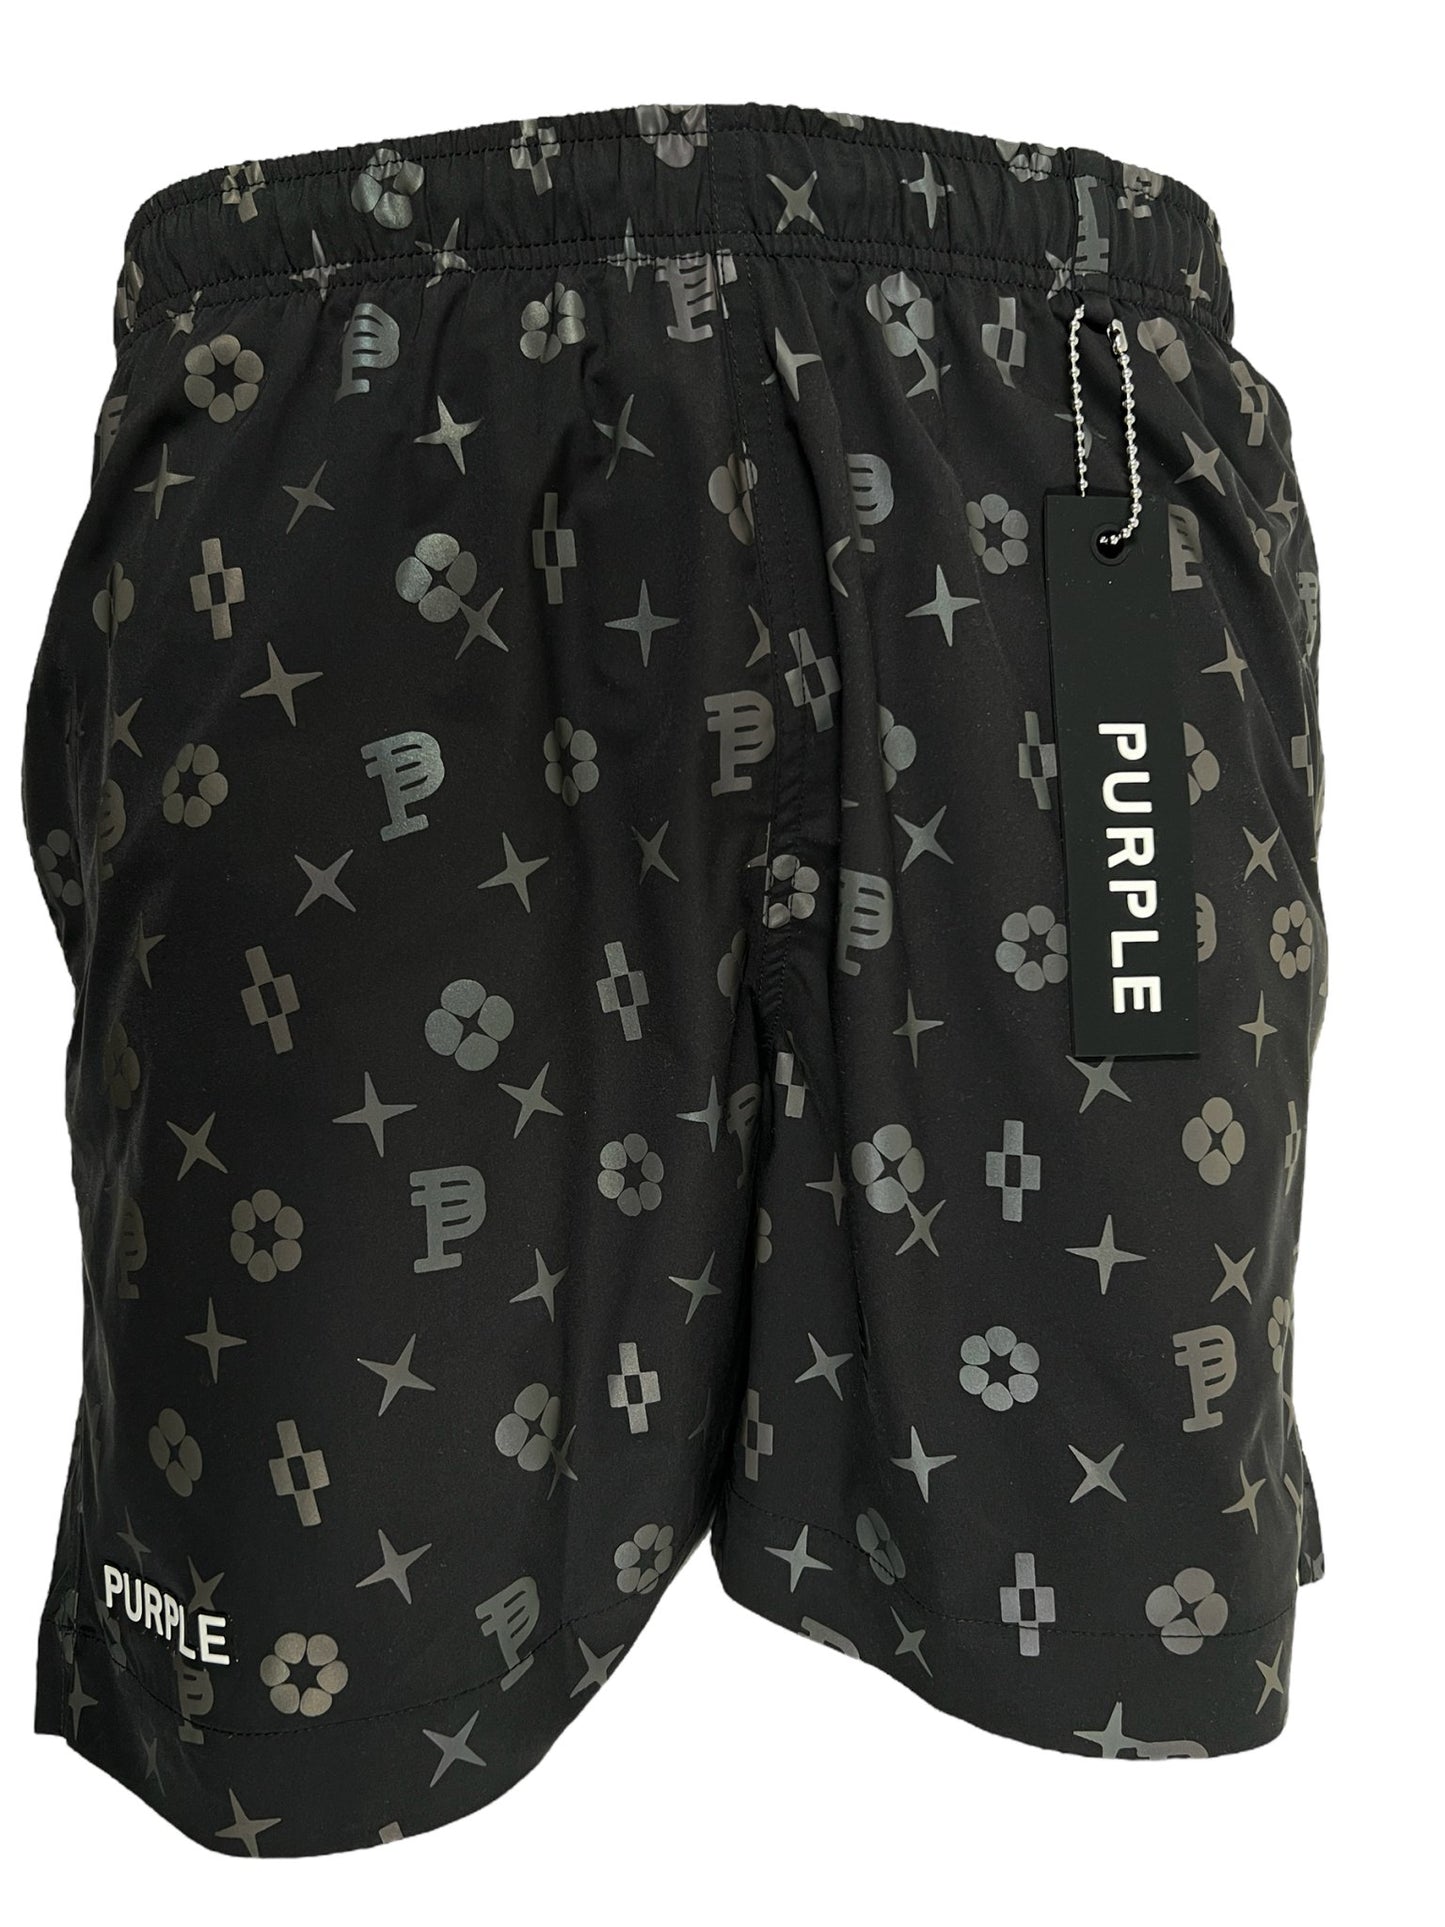 Black shorts with a unique design featuring a vibrant print of geometric shapes and symbols, a tag reading "PURPLE" attached to the waistband. These are the PURPLE BRAND P504-PBBH ALL ROUND SHORT AOP by PURPLE BRAND.